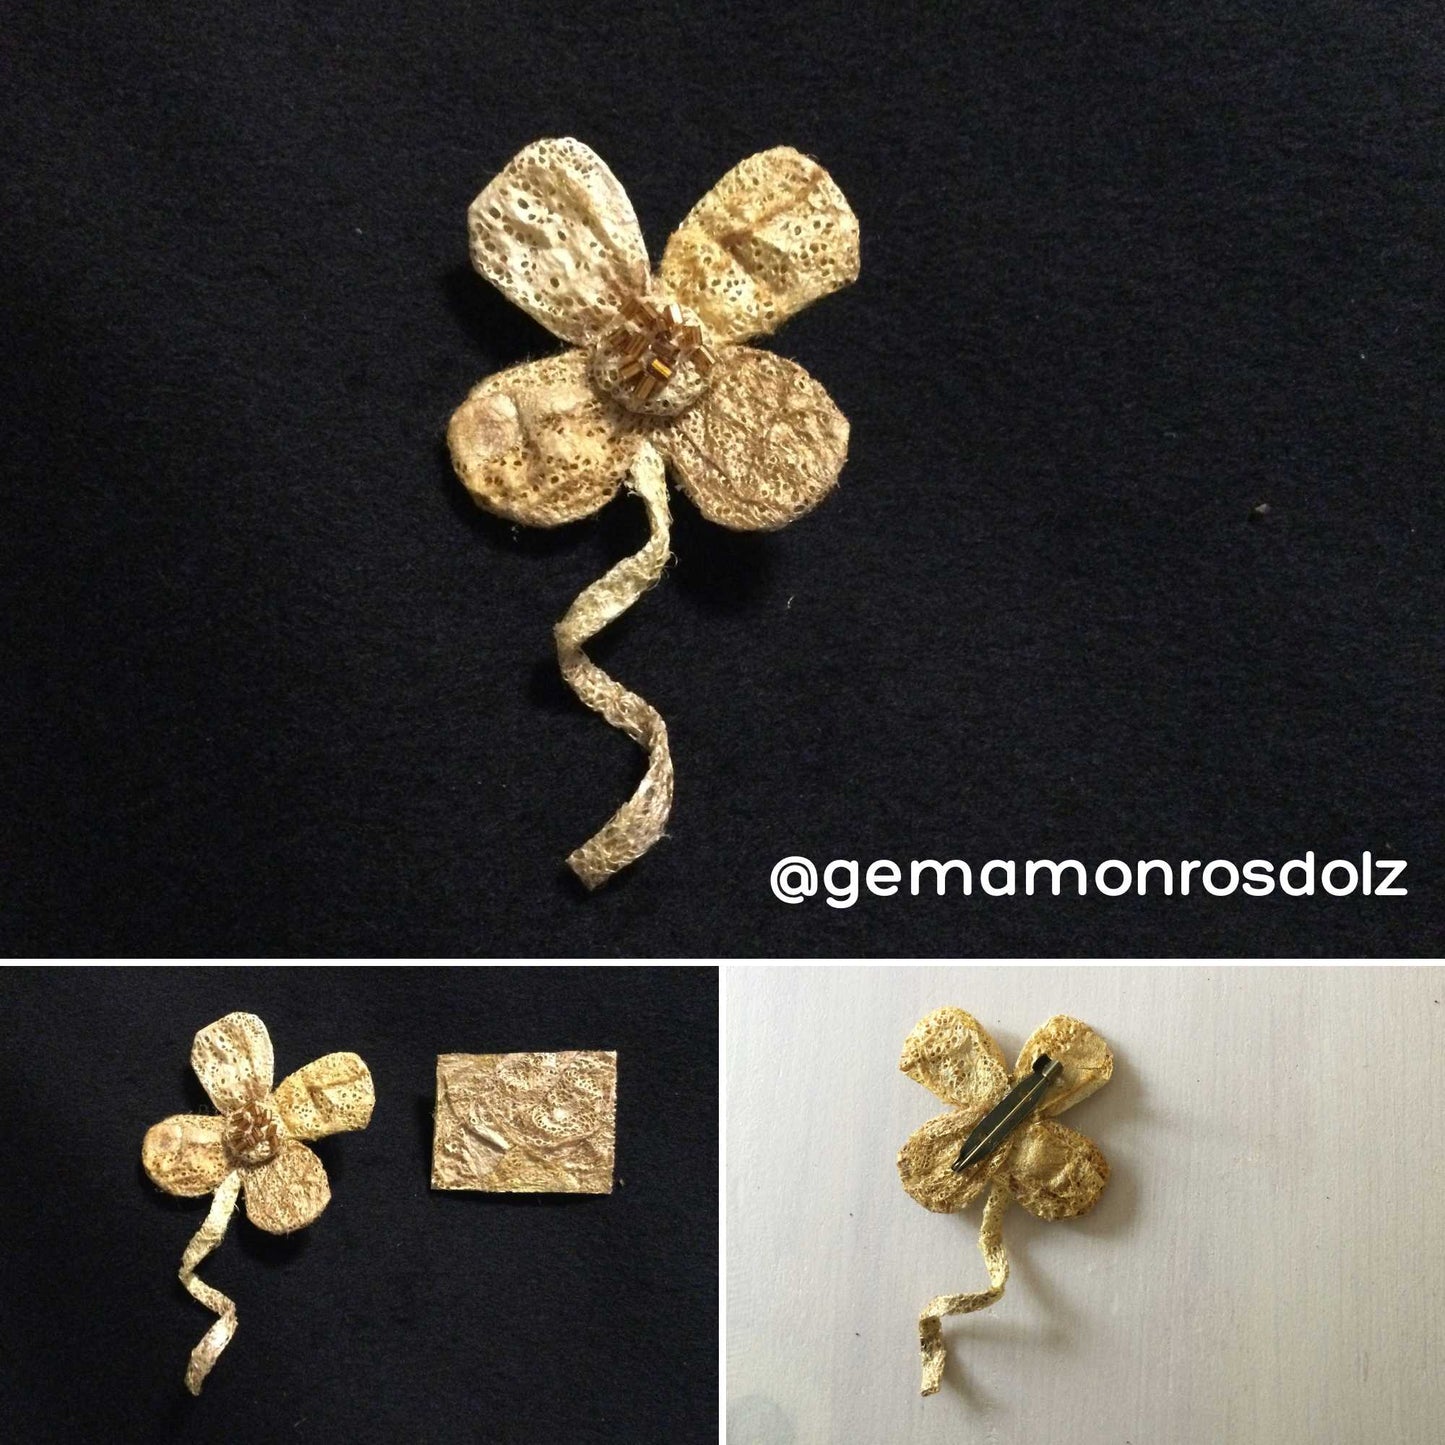 beautiful brooch handcrafted by @gemamonrosdolz using gold cricula cocoons. cruelty free, naturally golden cocoons